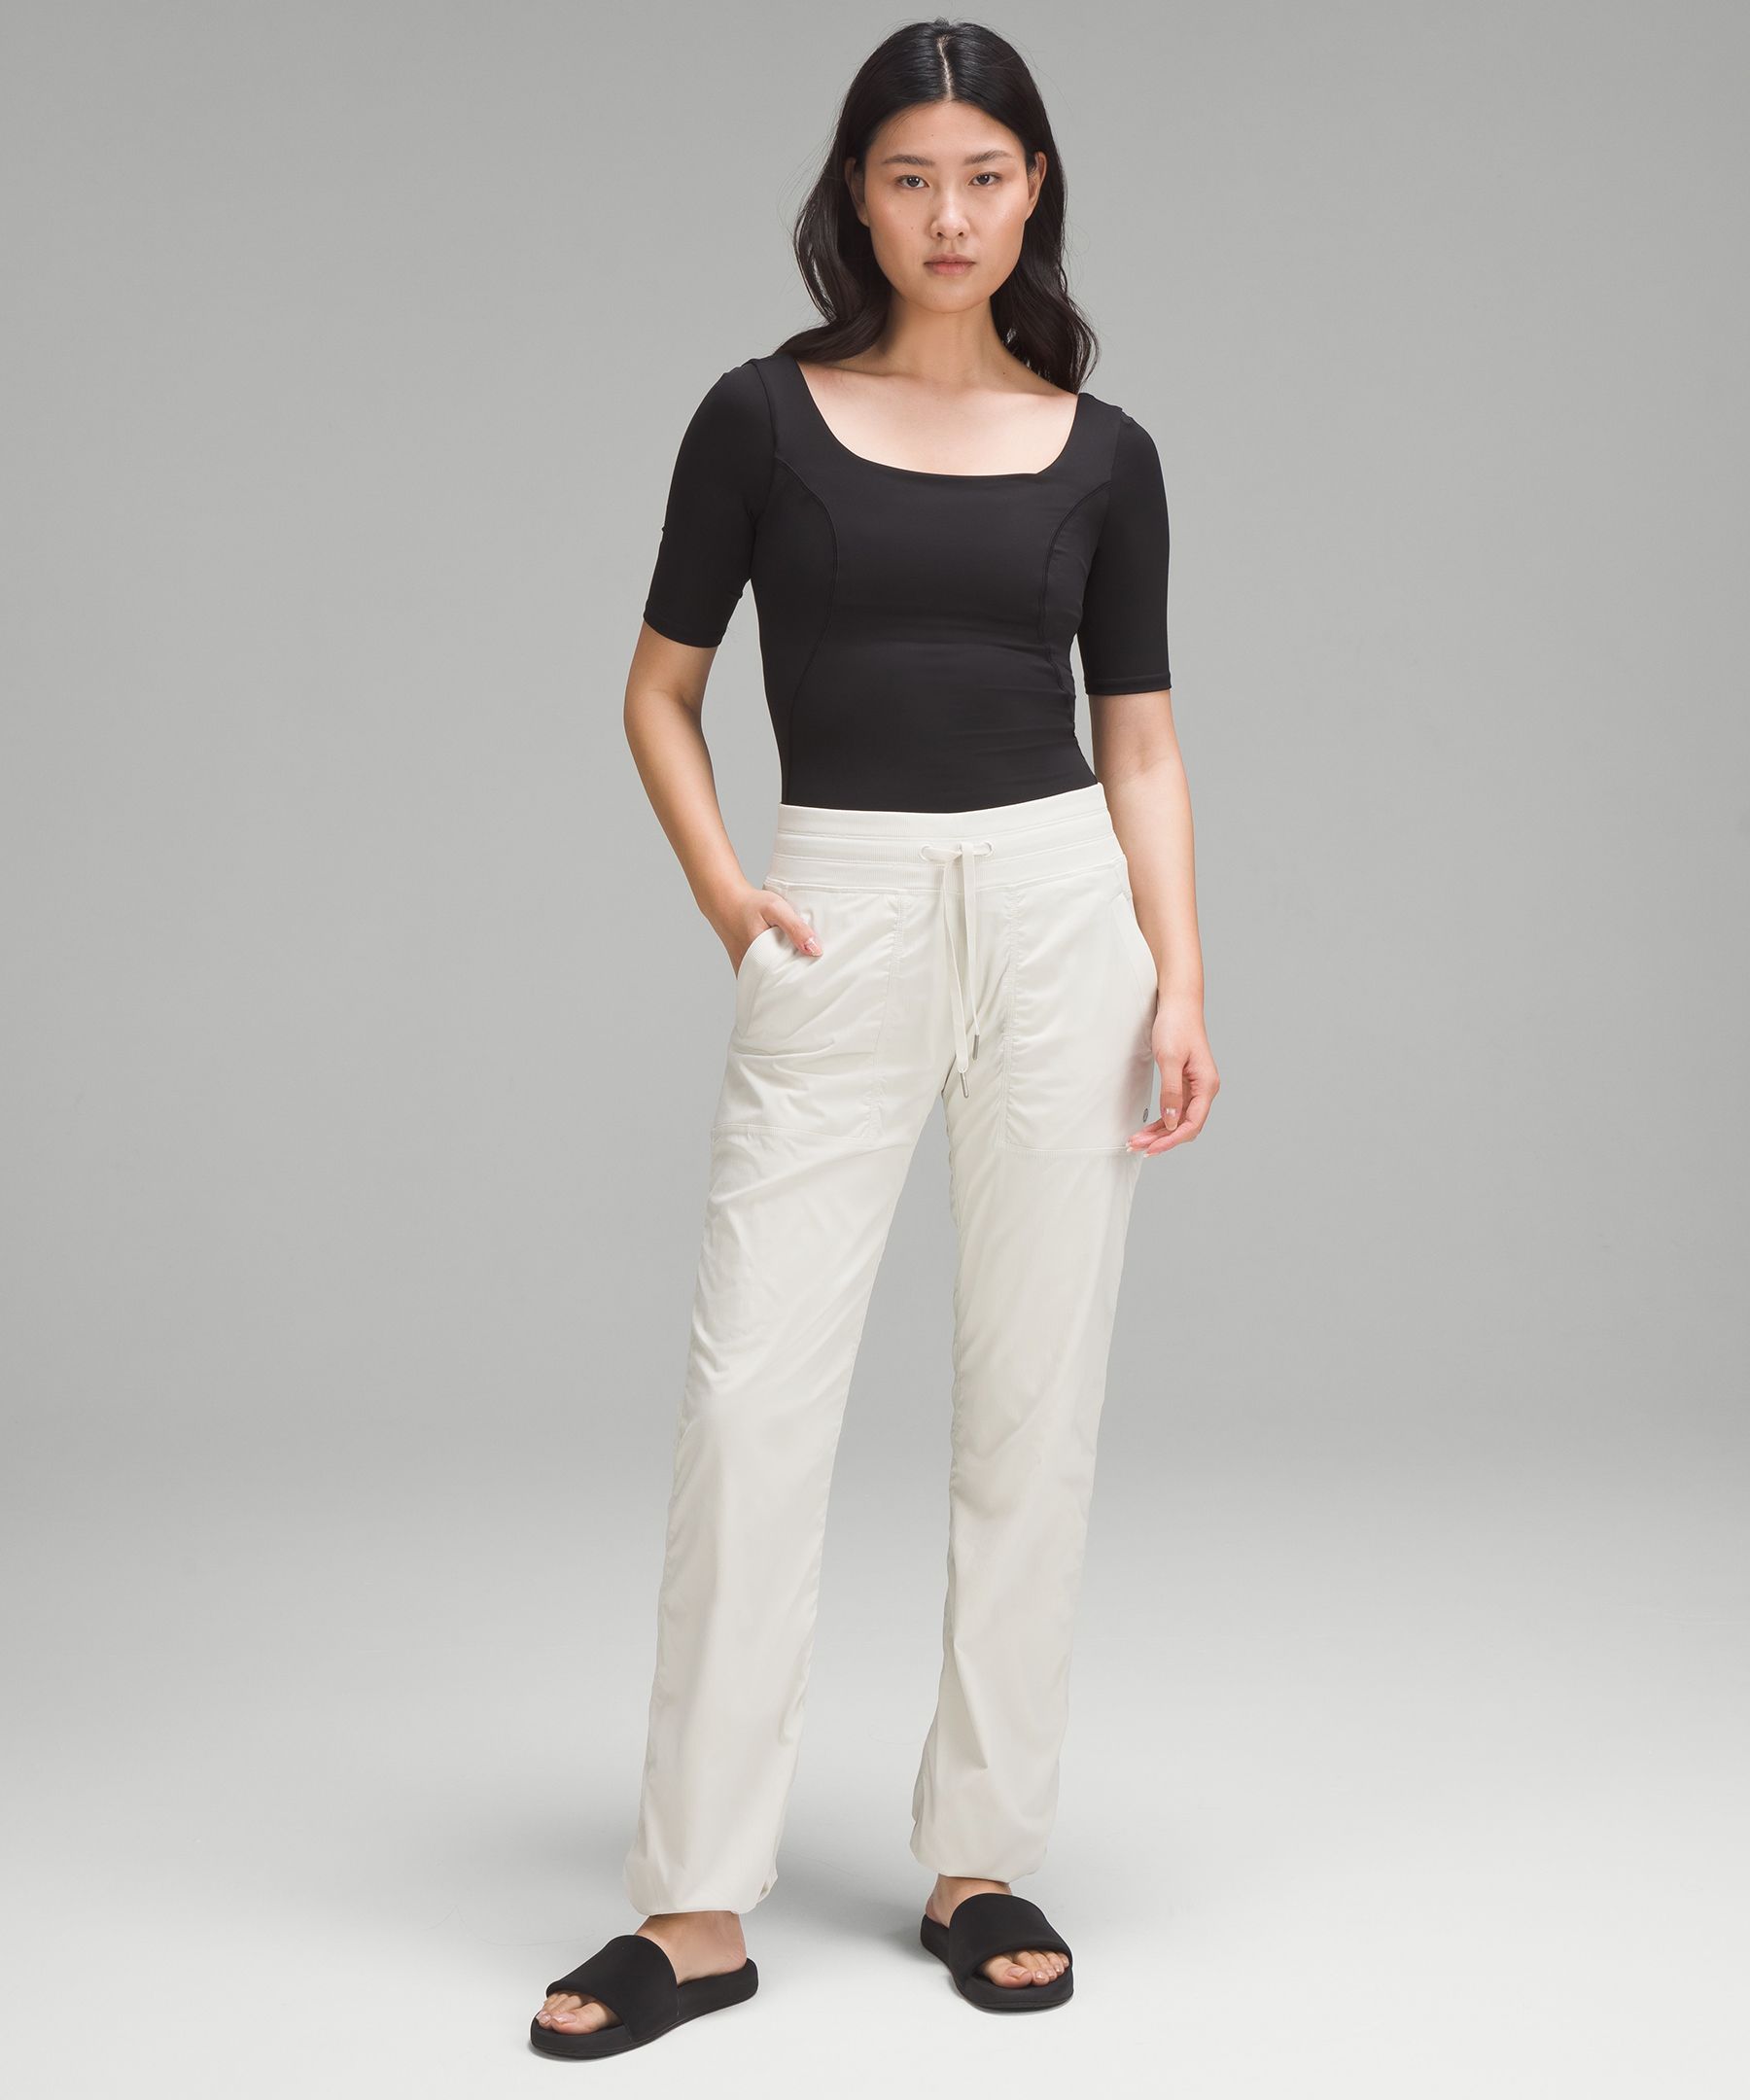 Lululemon Cargo Pants Women's  International Society of Precision  Agriculture